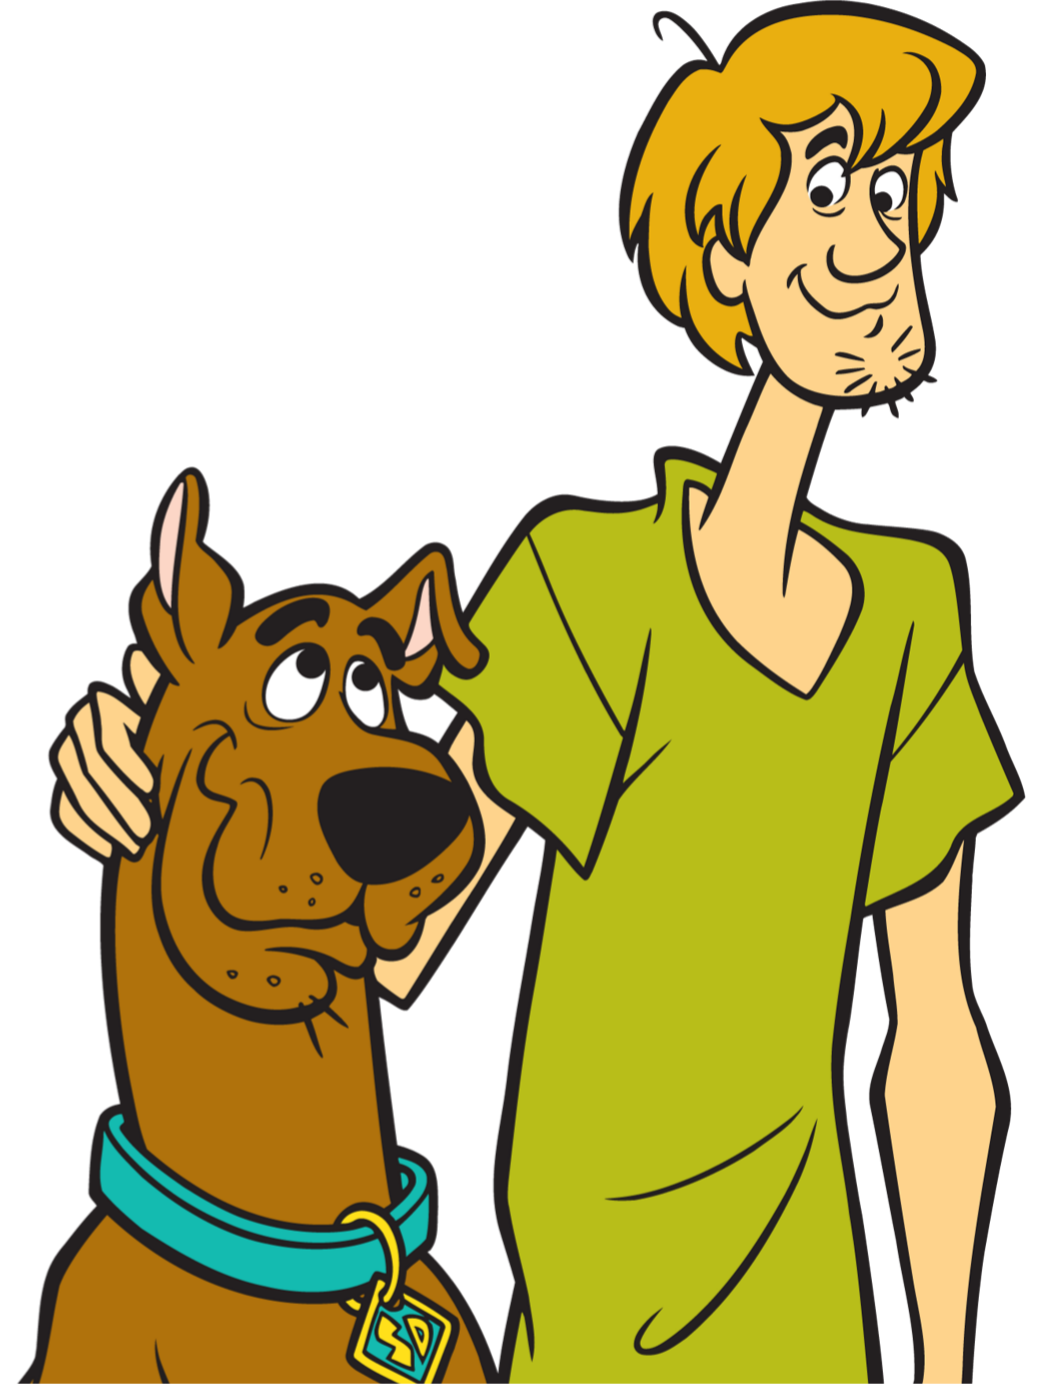 "Dog of the Day" - Shaggy & Scooby-Doo Unlikely Concept.